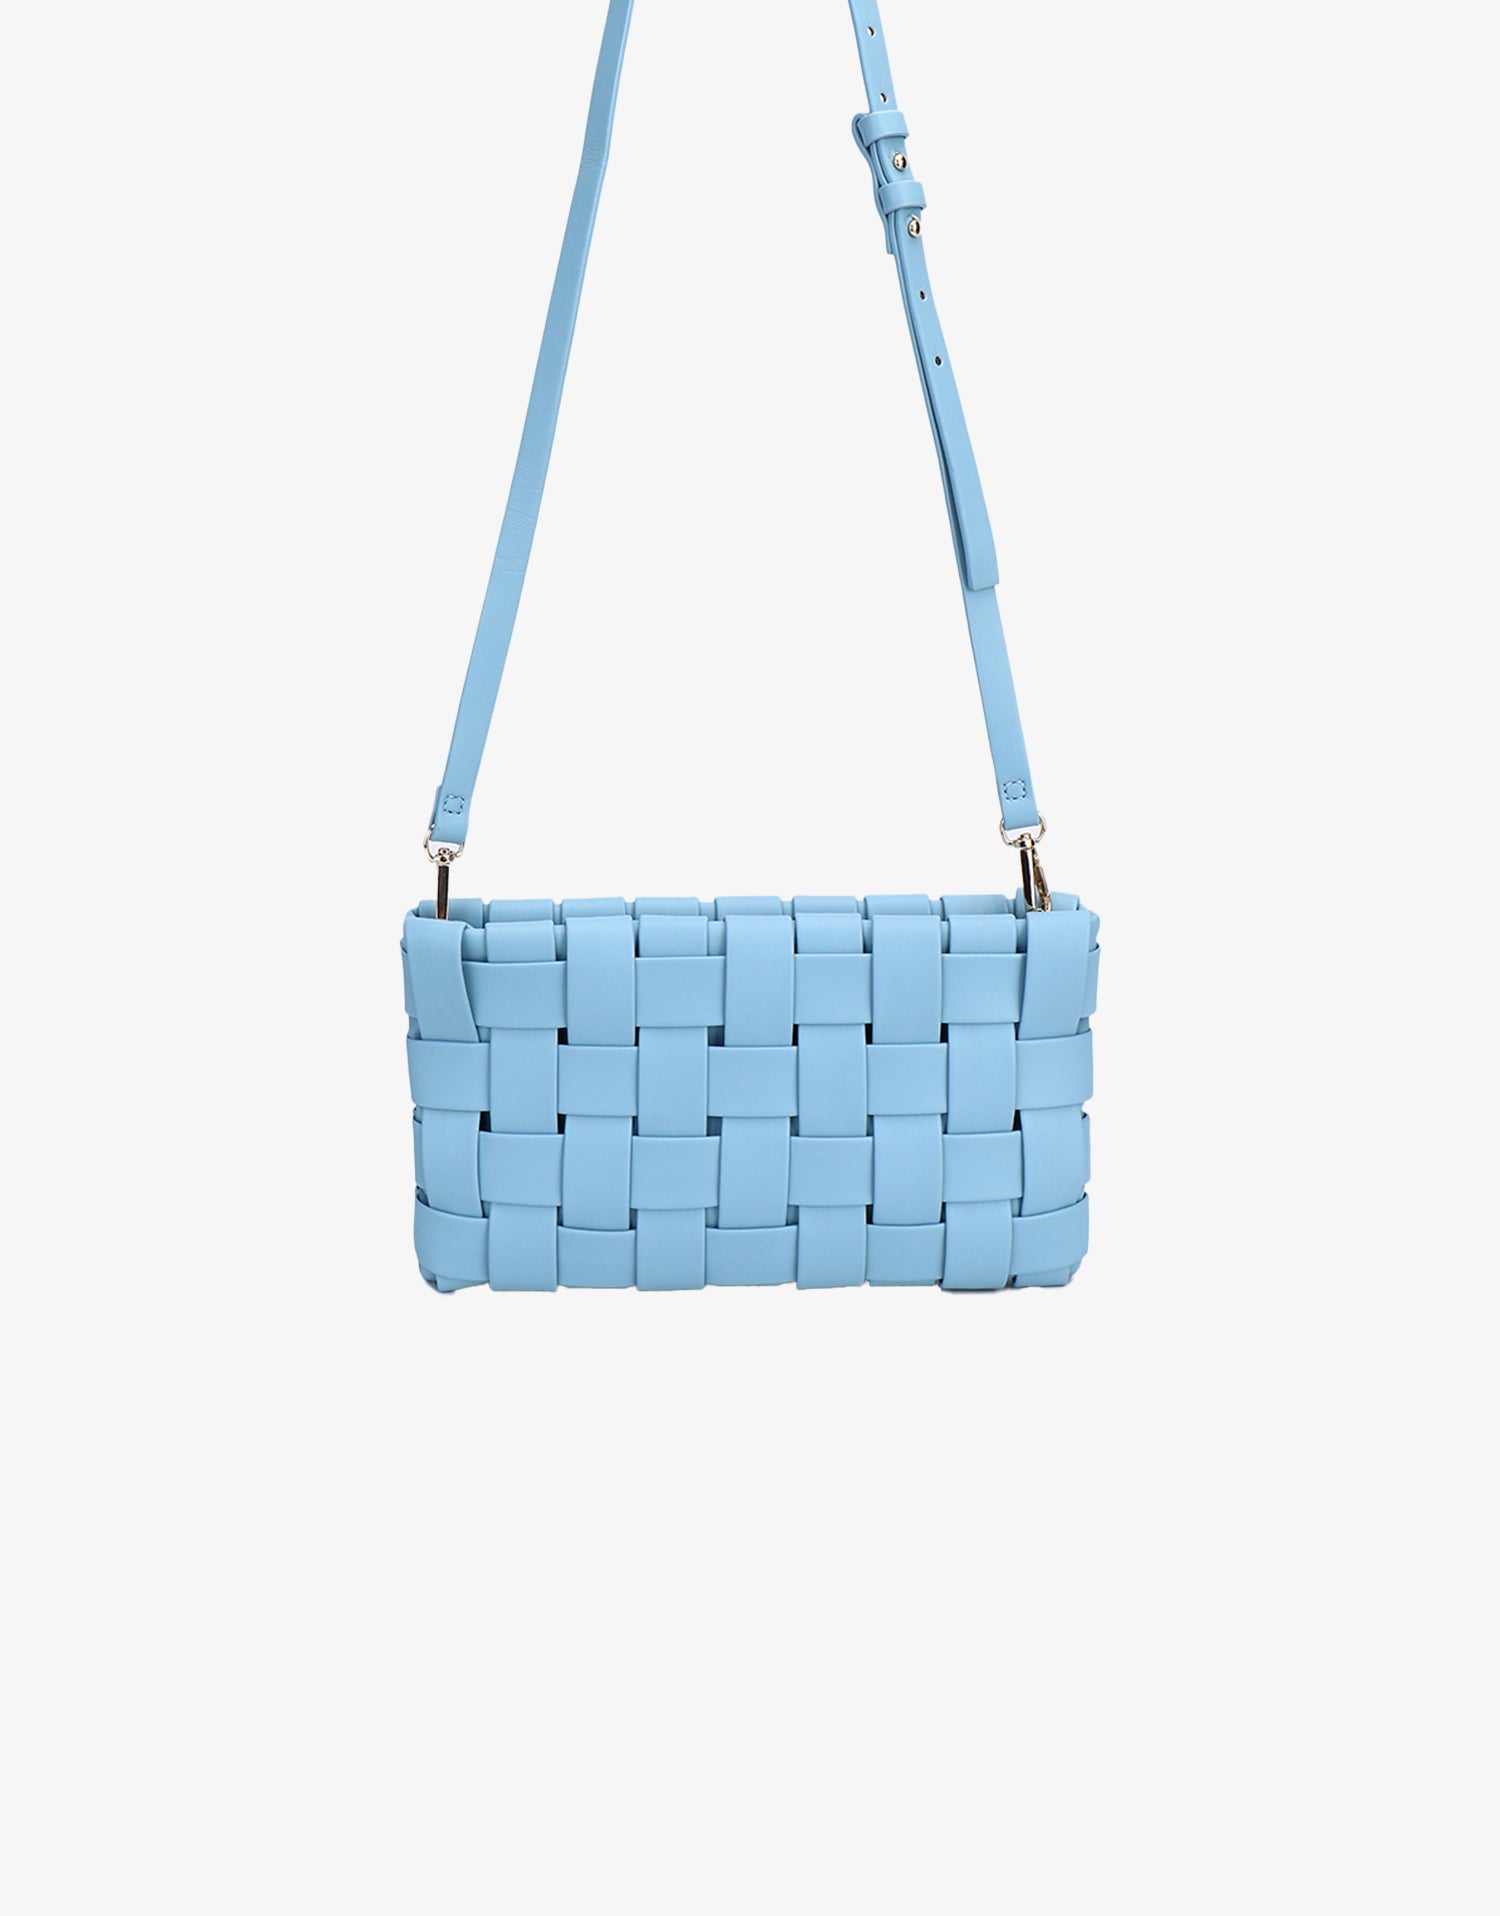 LINDY WOVEN CLUTCH SMALL SKY BLUE